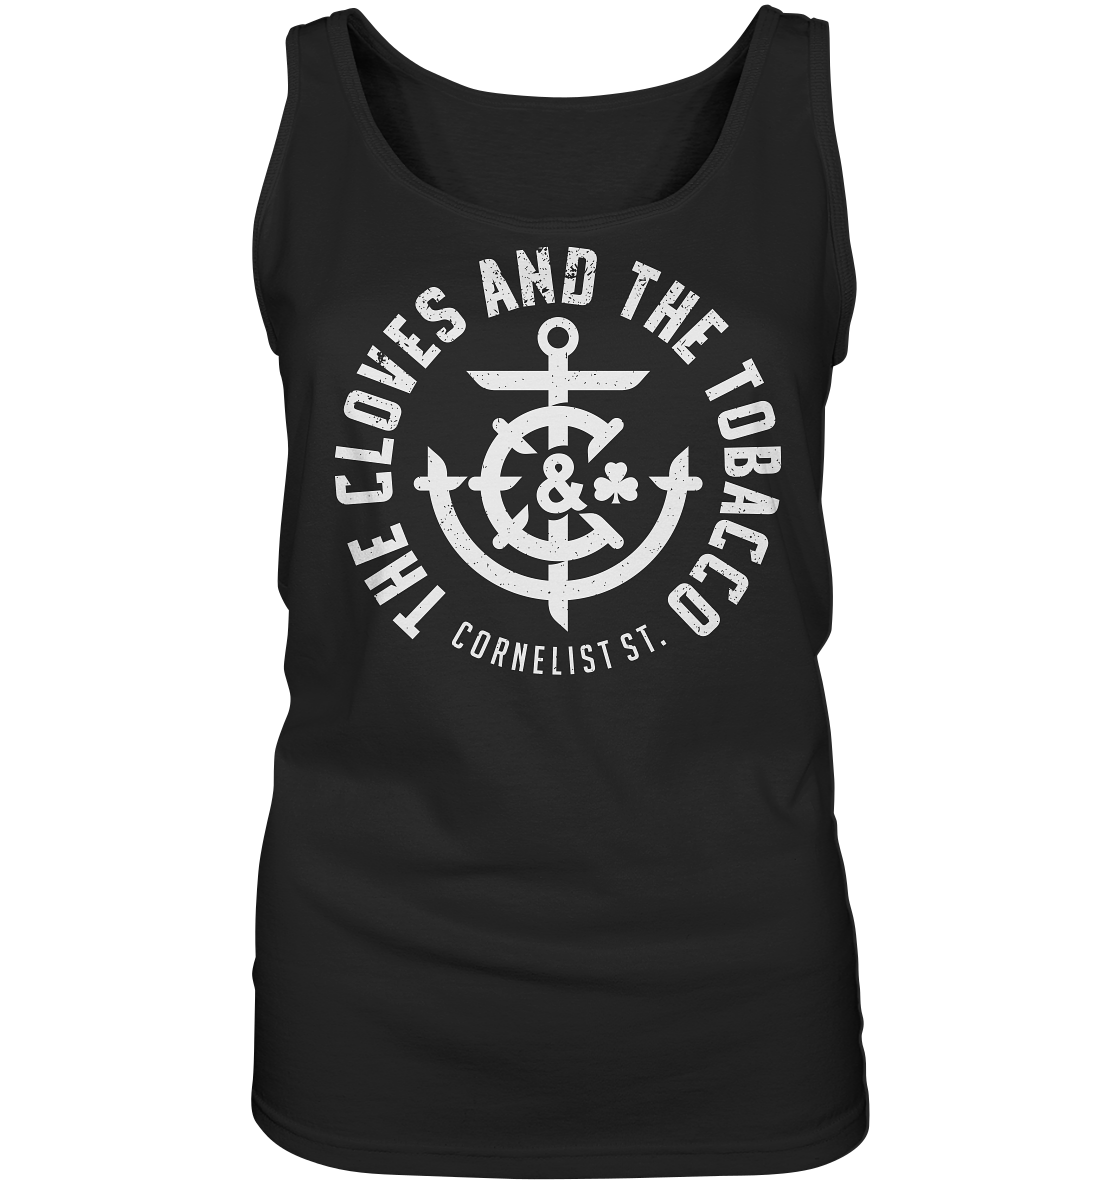 The Cloves And The Tobacco "Cornelist St." - Ladies Tank-Top